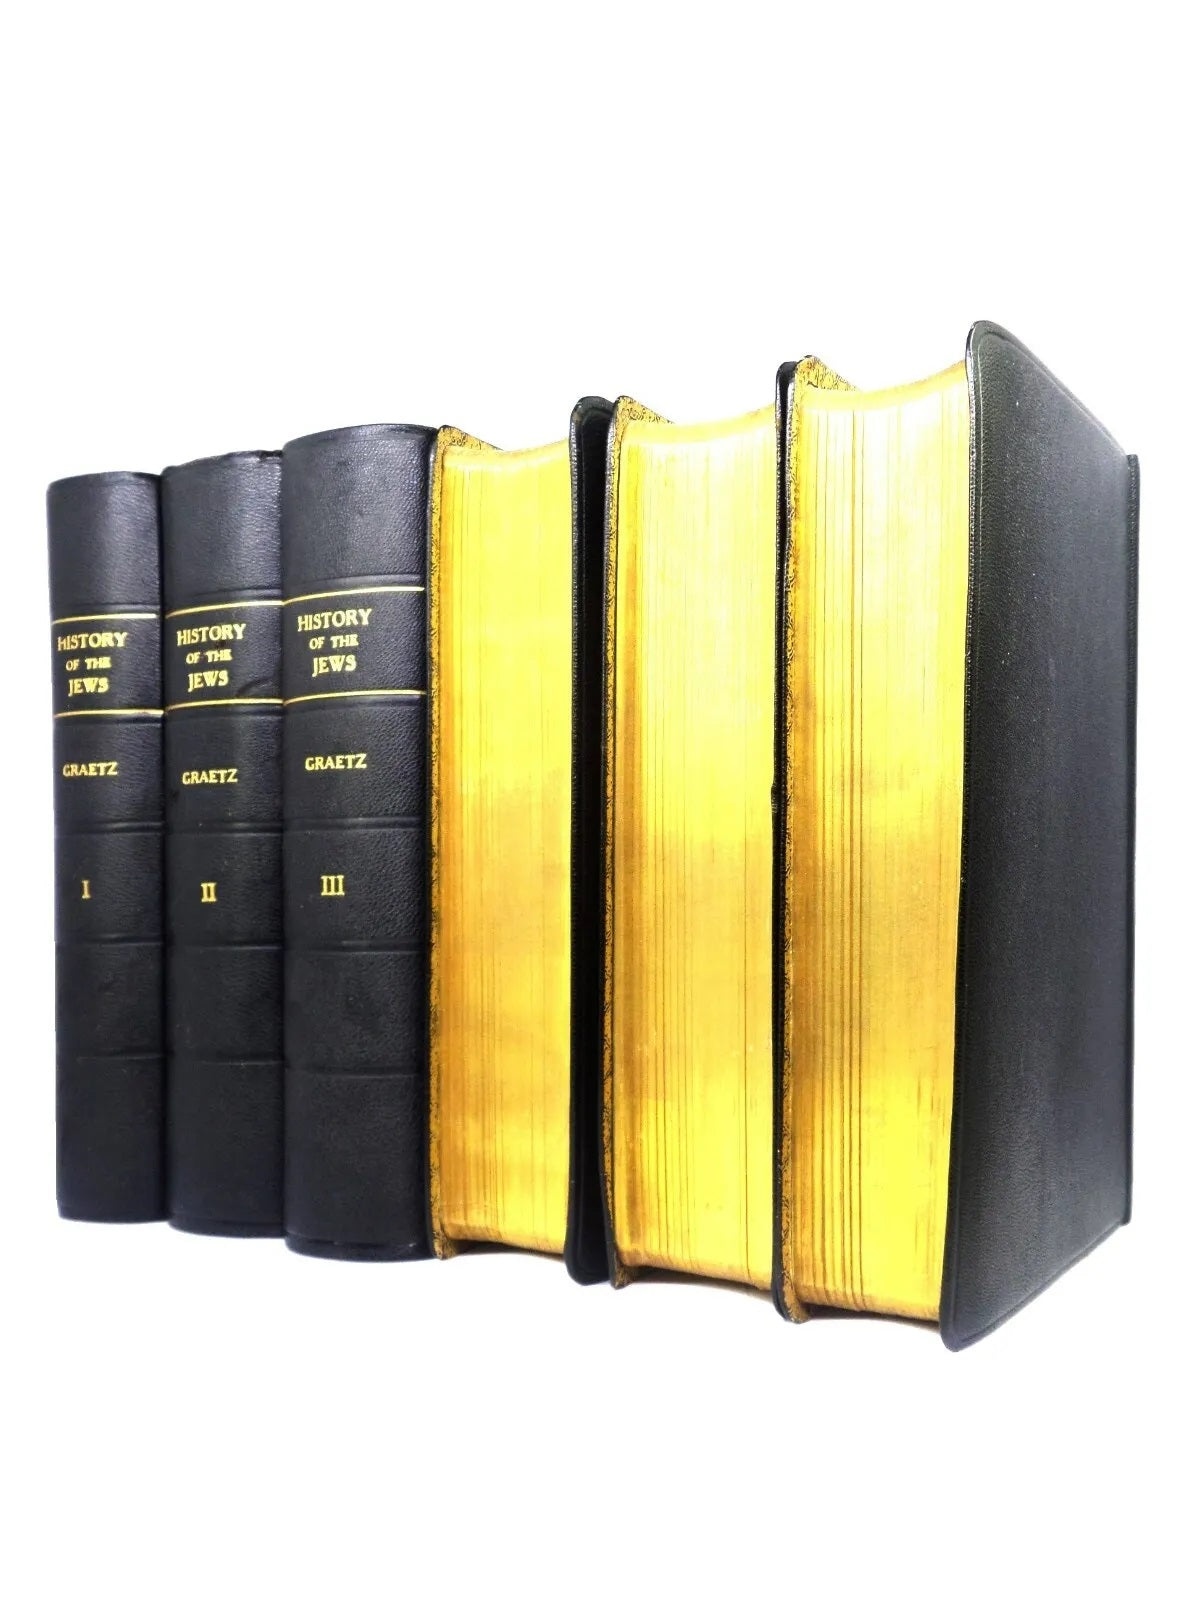 HISTORY OF THE JEWS BY HEINRICH GRAETZ 1956 LEATHER BOUND IN SIX VOLUMES